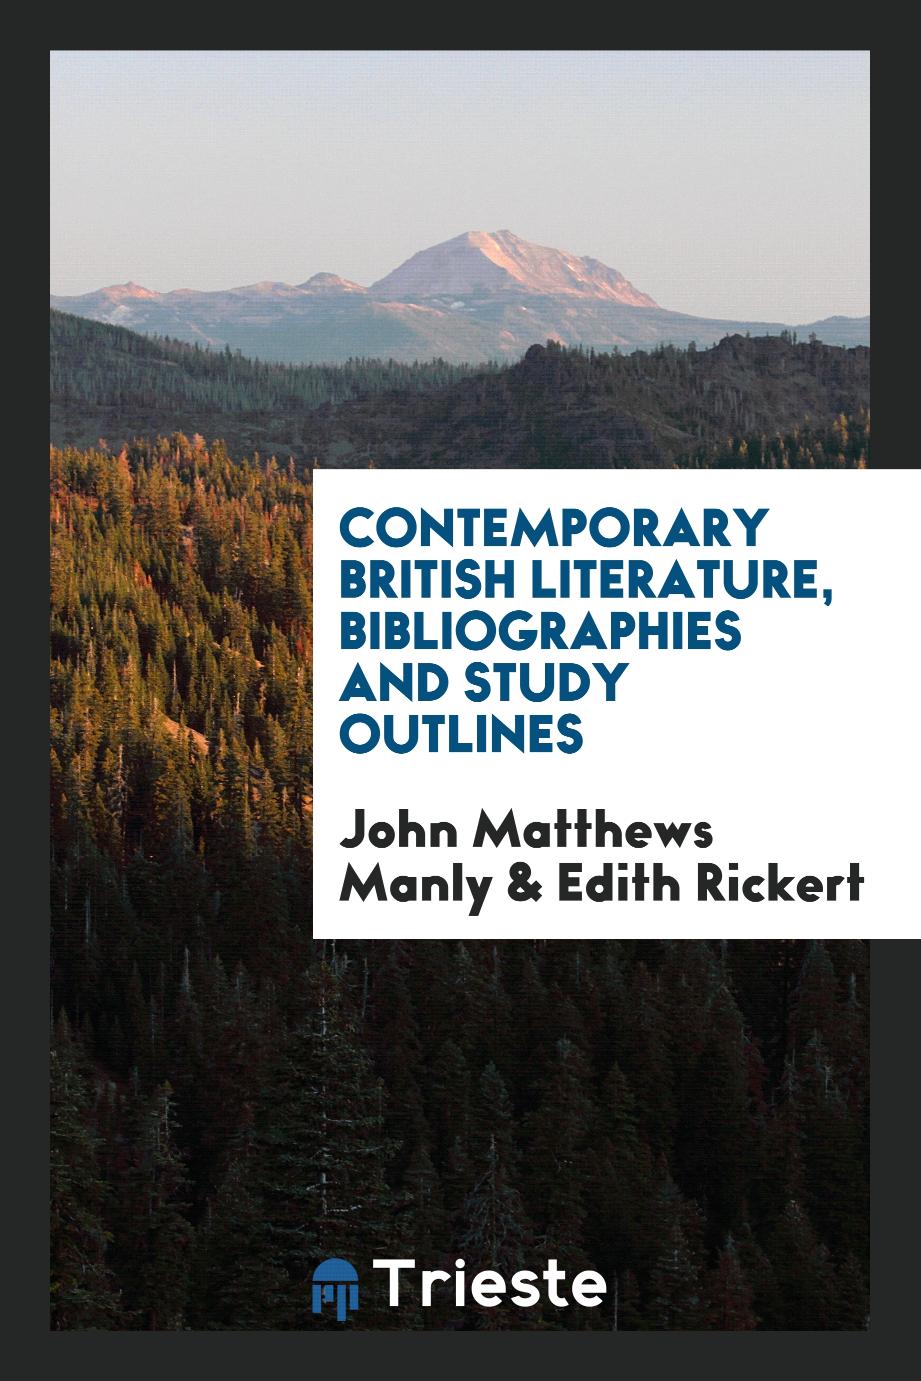 Contemporary British literature, bibliographies and study outlines